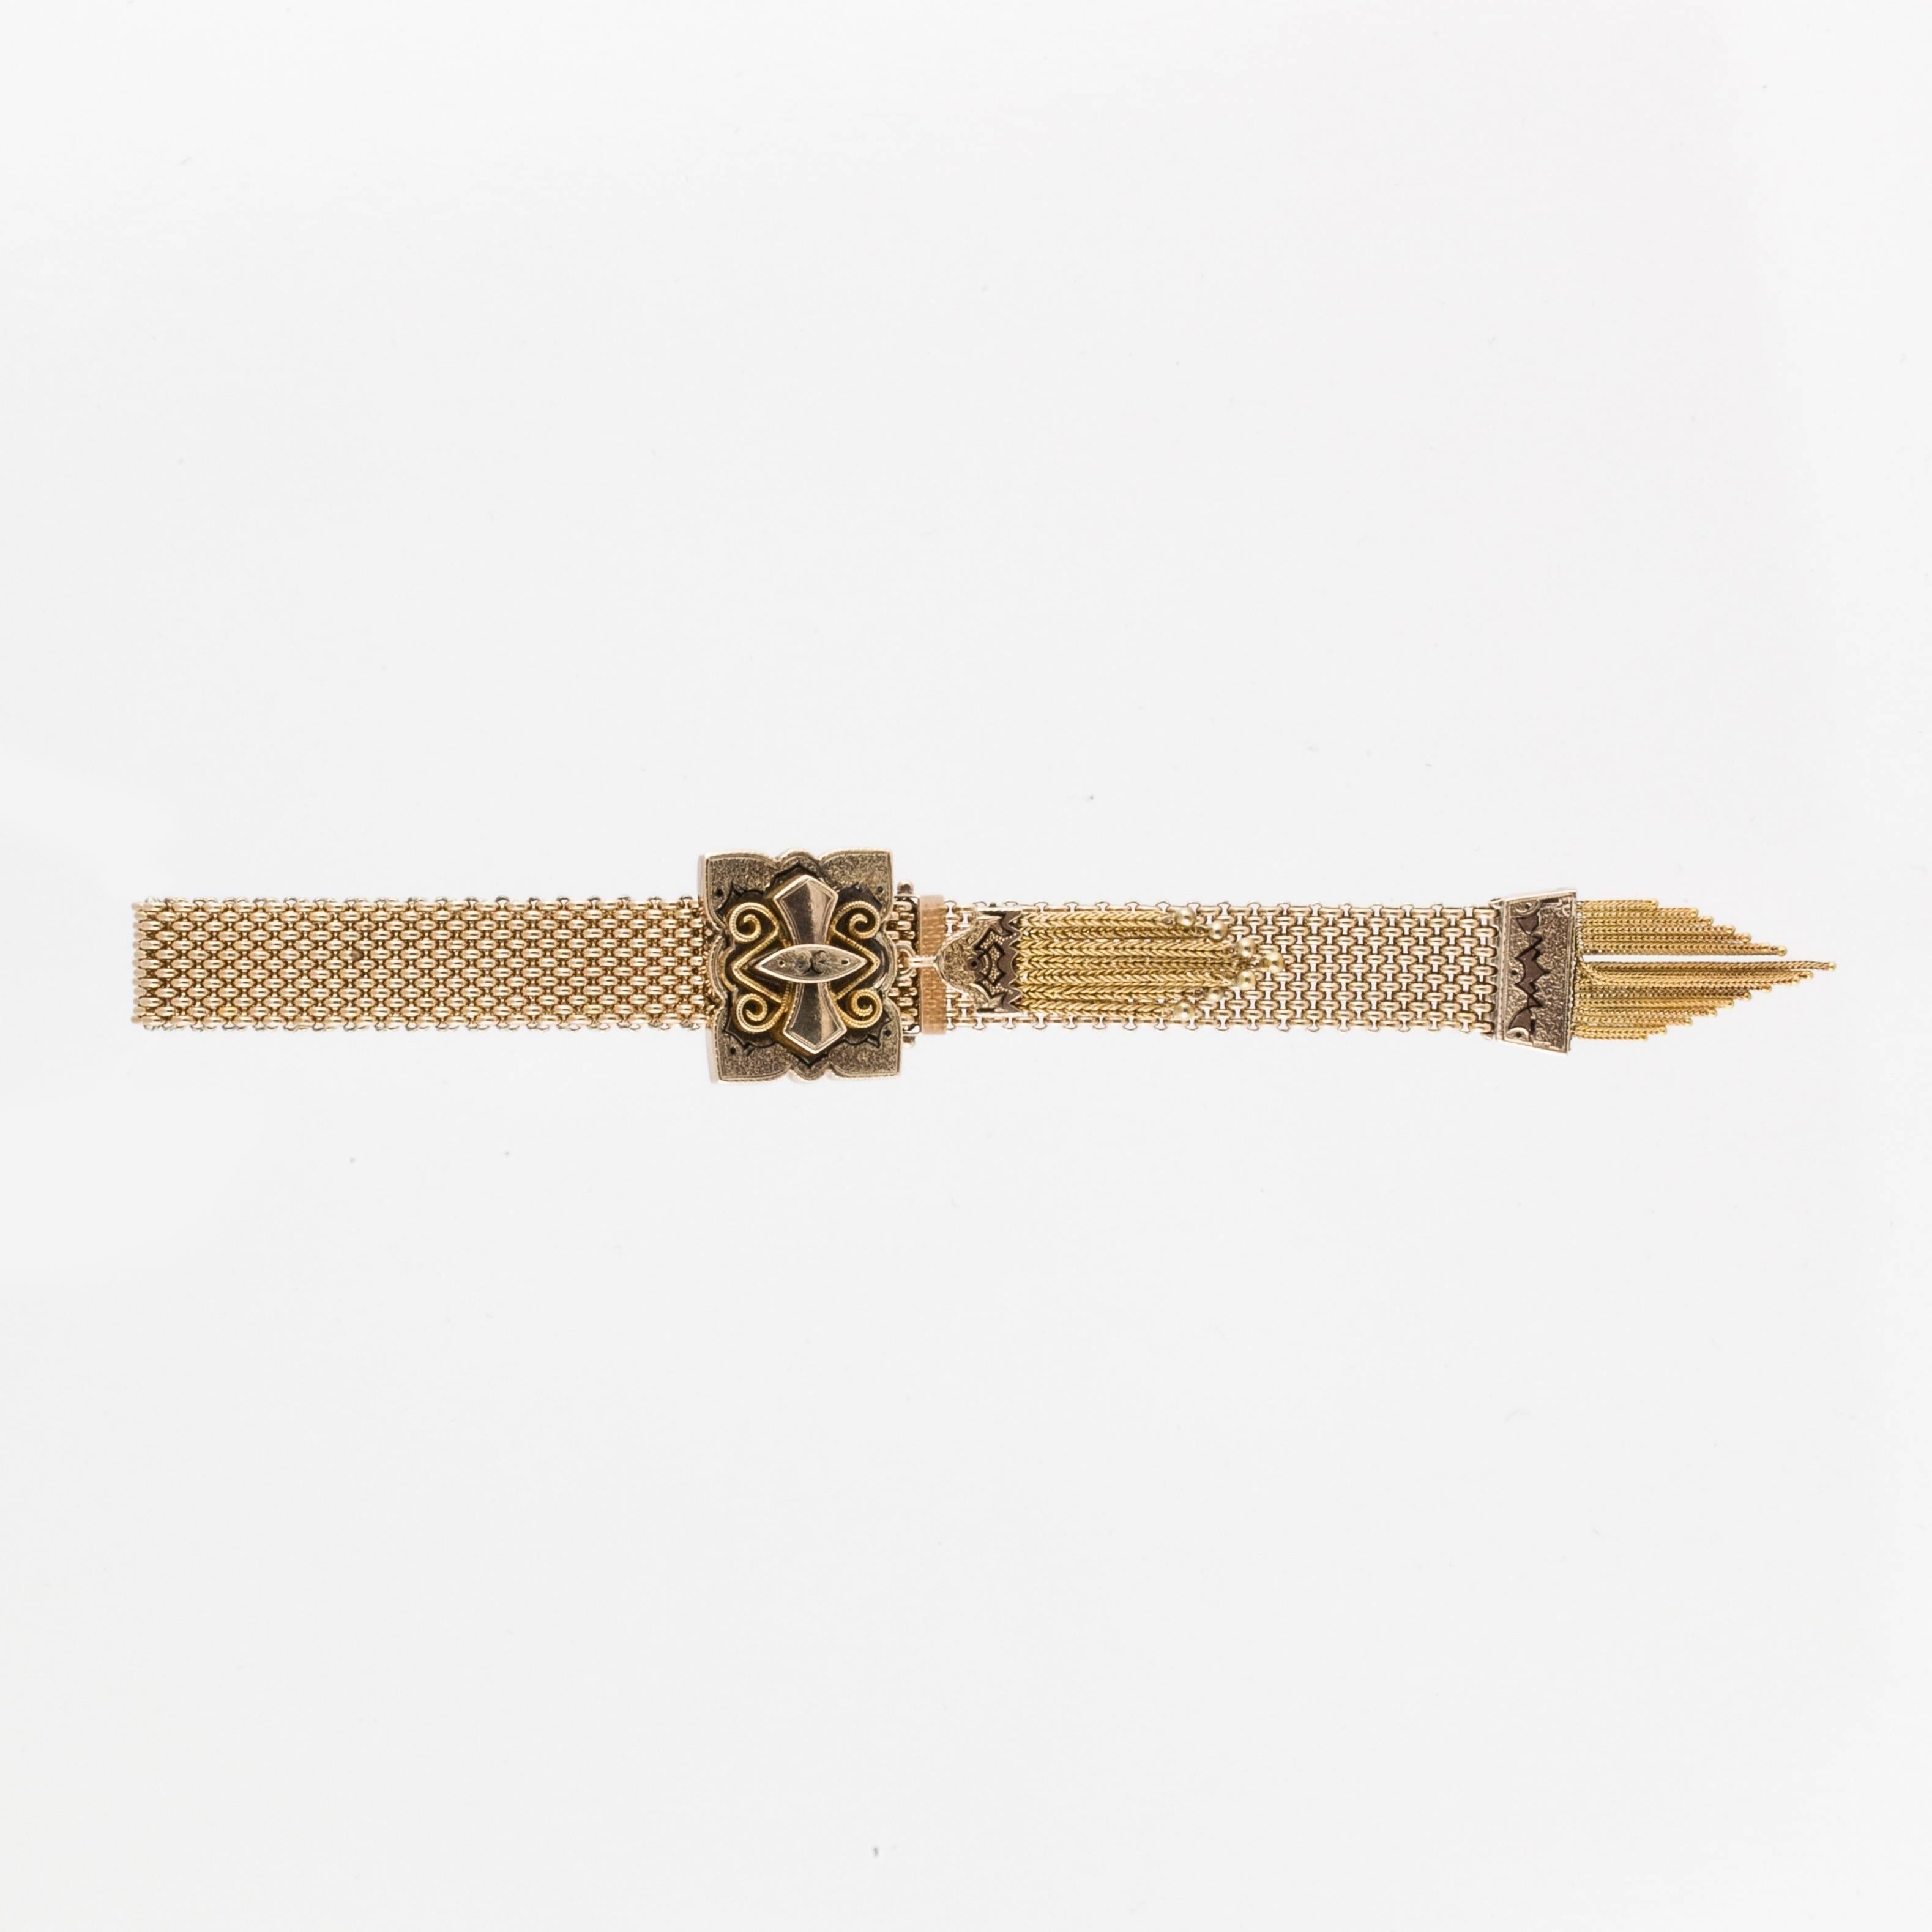 Victorian tassel bracelet in 14K yellow gold.  The tassels are complete with all of the balls intact.  The plaque measures 7/8 inches by 3/4 inches and the bracelet is 1/2 an inch wide.  Enamel is still in good condition.